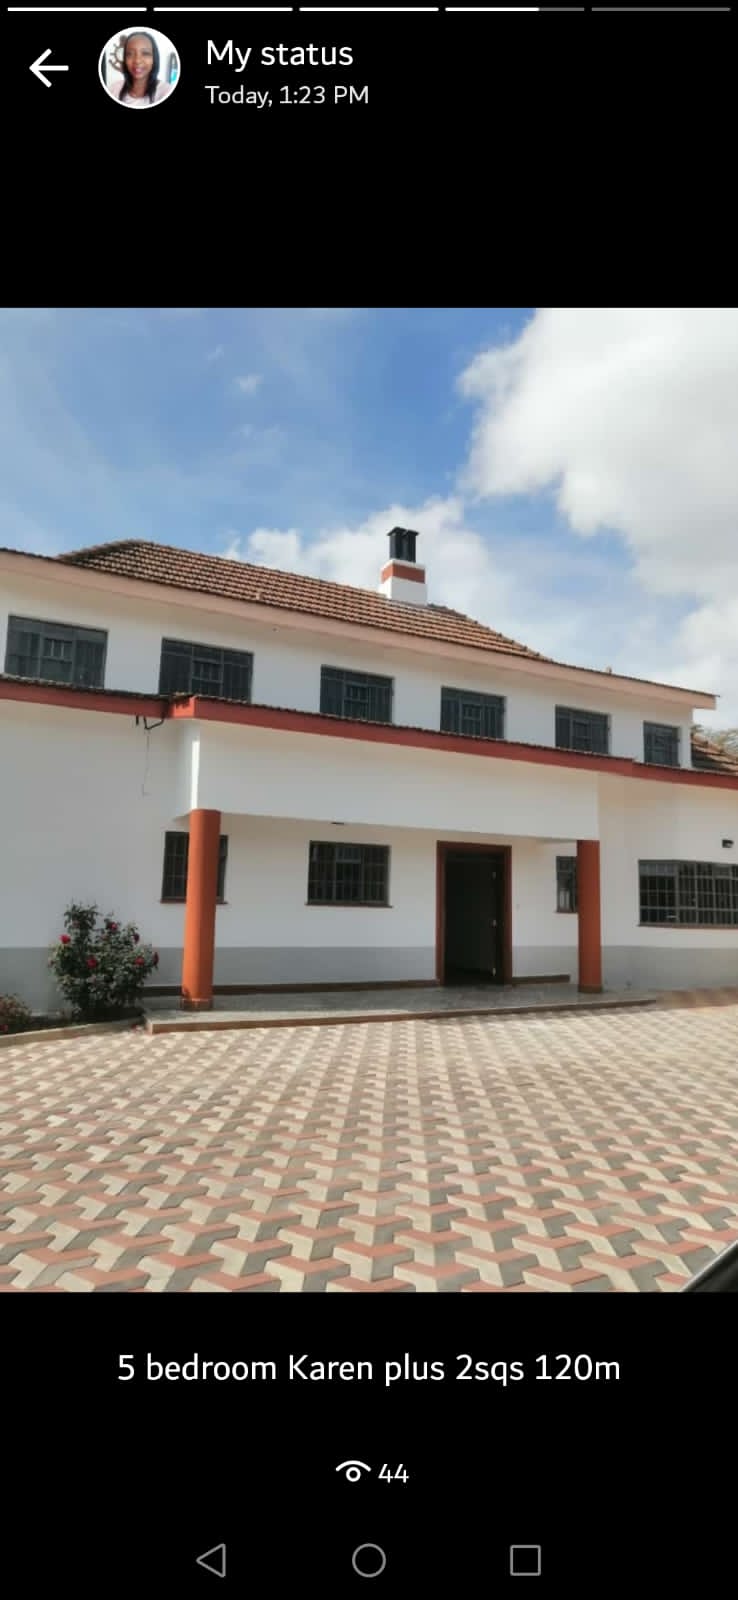 5 bedroom mansionete sits on 1/2 acre Karen near Nairobi academy 120m EXCLUSIVE